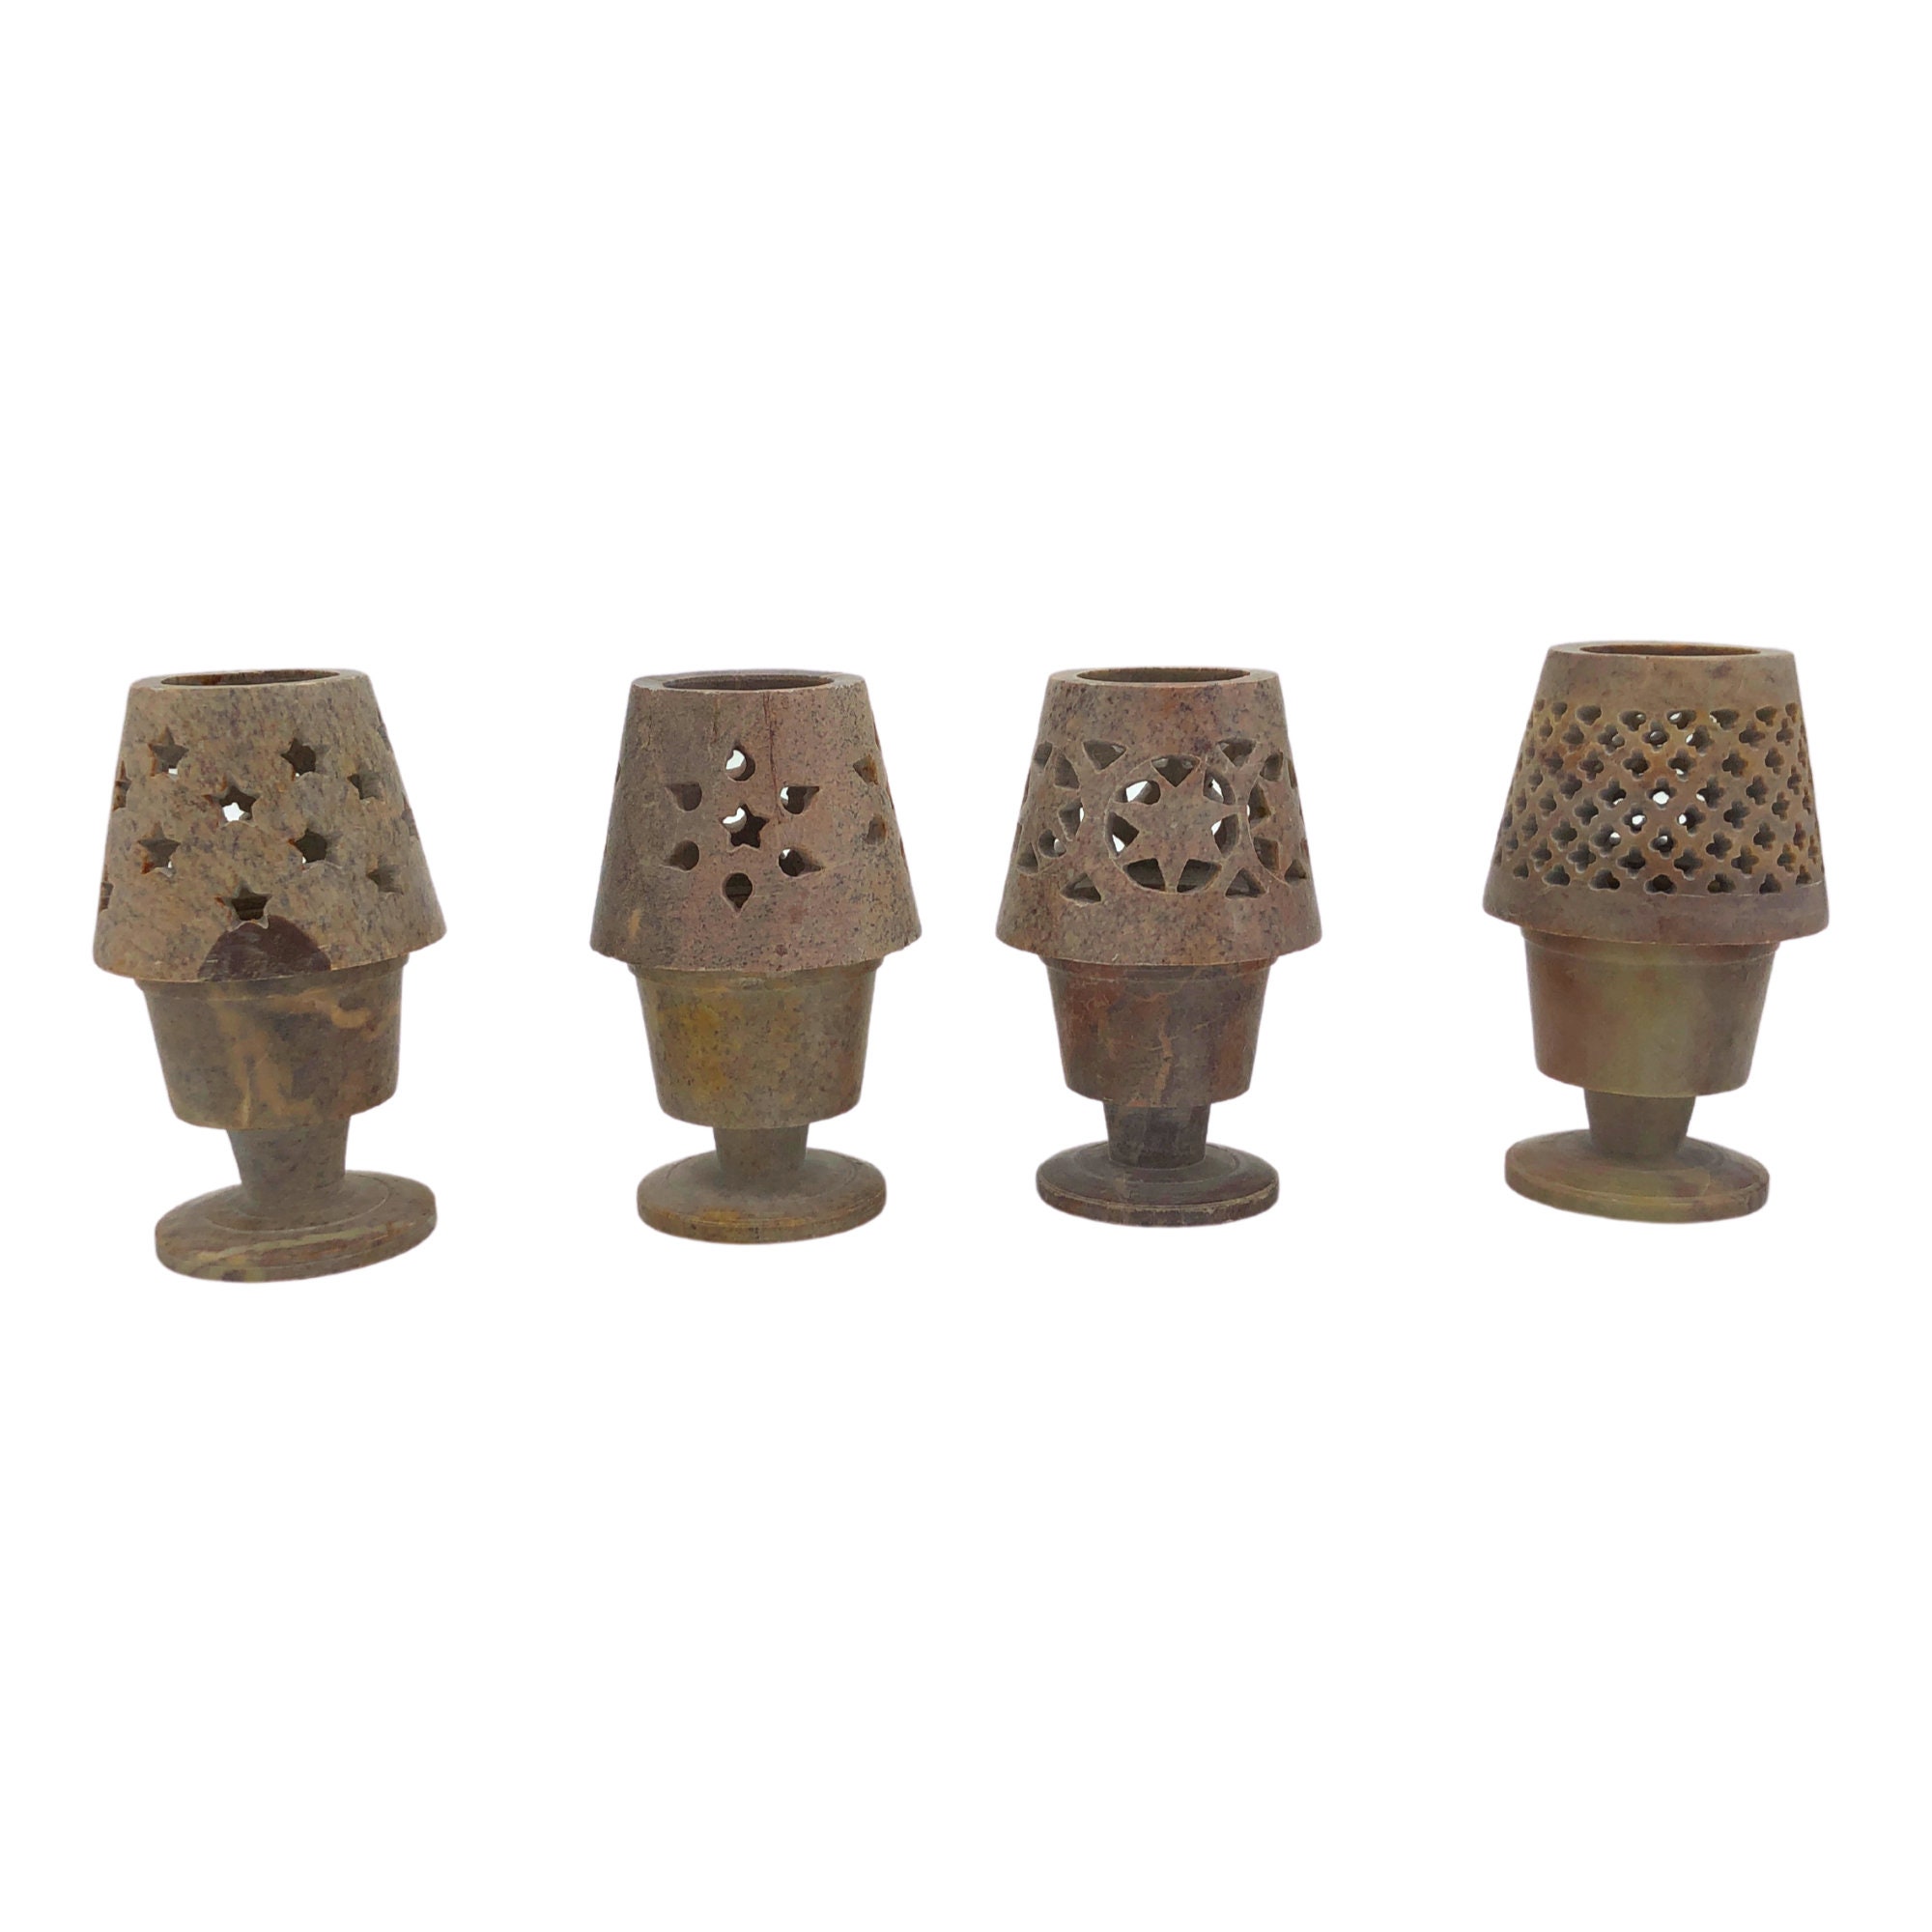 Details about   Set of 4 Hand Carved Solid Soapstone Candle Lamp With Shade Various Designs 